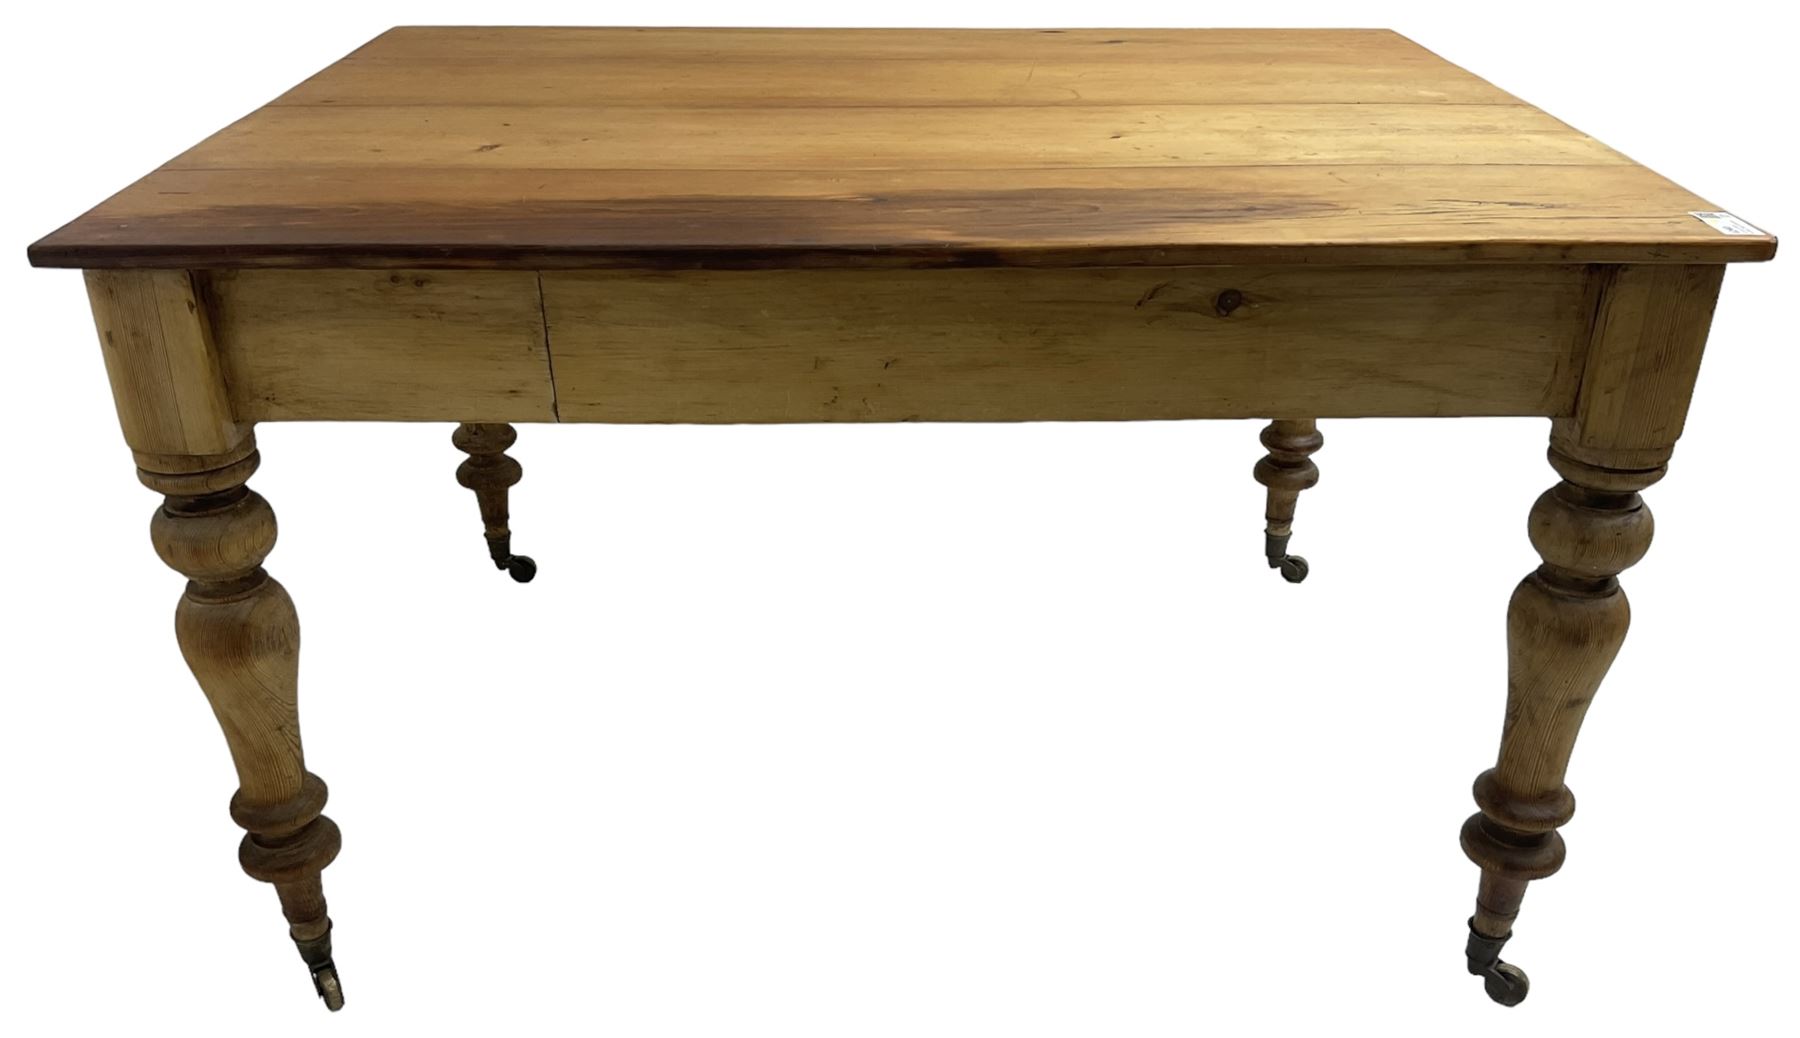 Victorian pine farmhouse kitchen dining table - Image 4 of 8